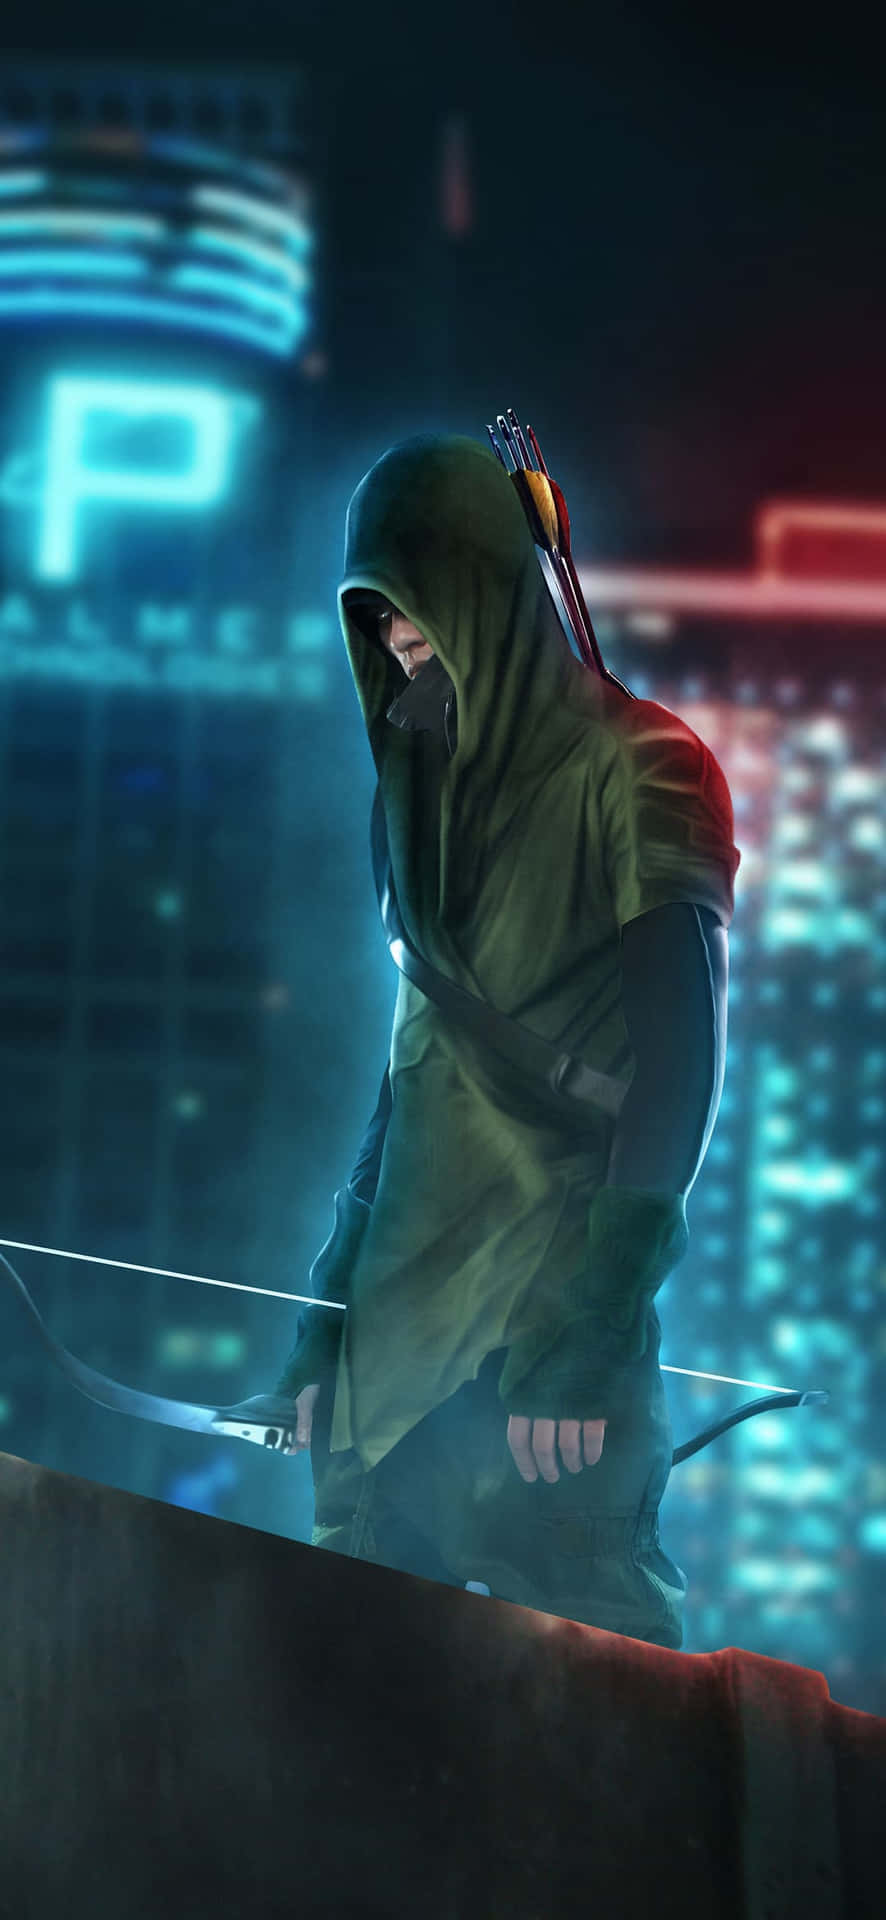 A Futuristic And Stylish Edition Of The Popular Green Arrow Iphone Wallpaper